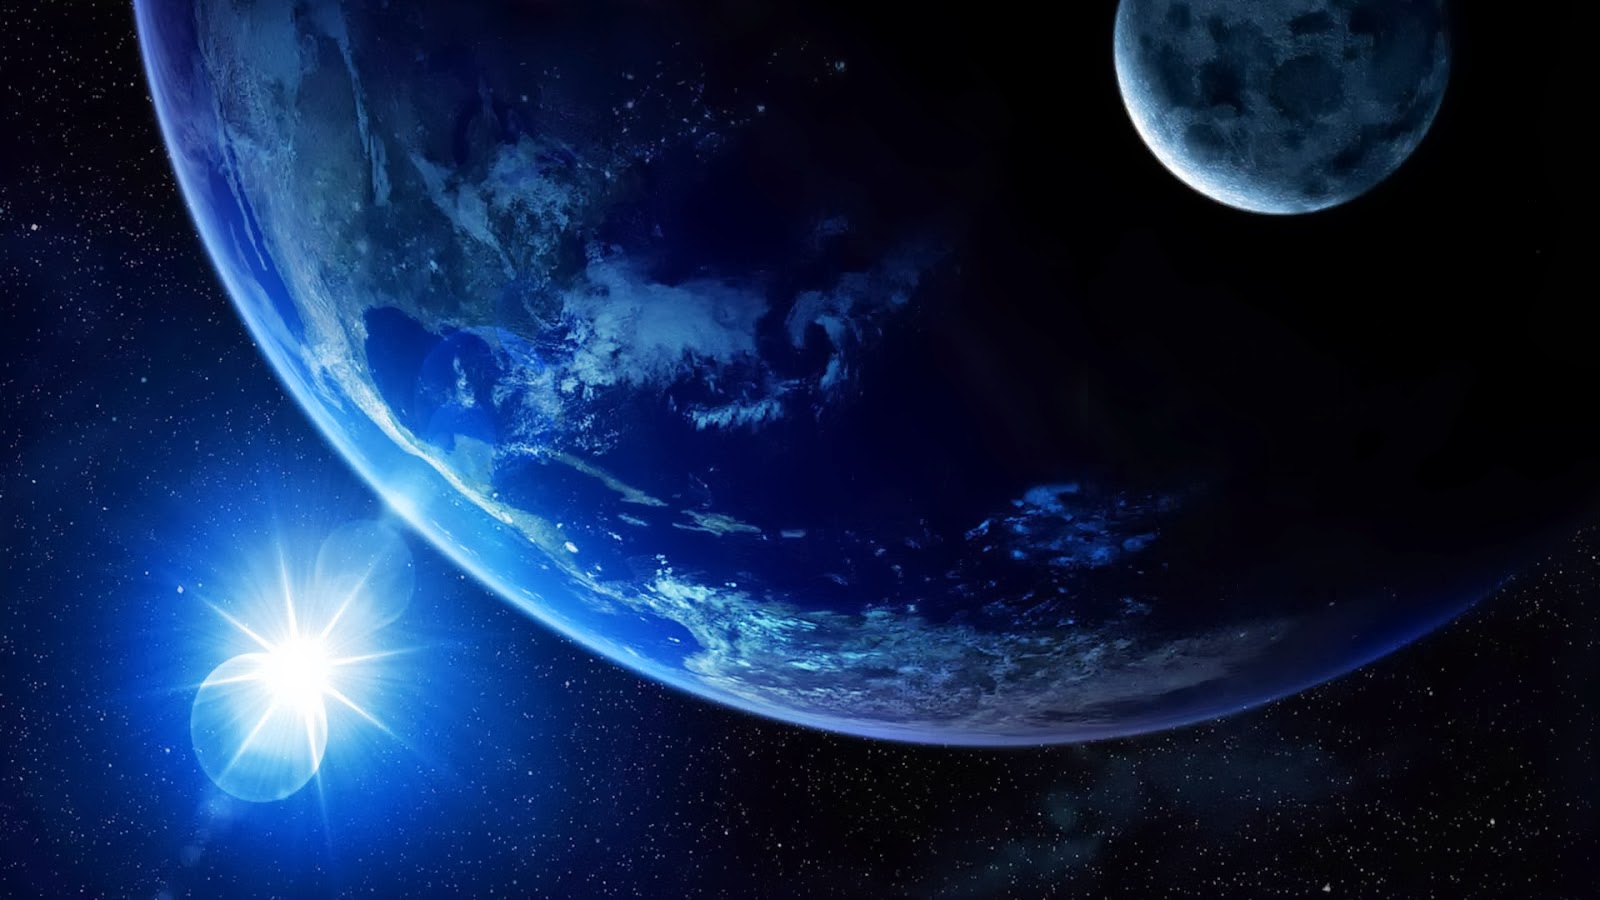 1080p wallpaper,outer space,planet,atmosphere,astronomical object,blue